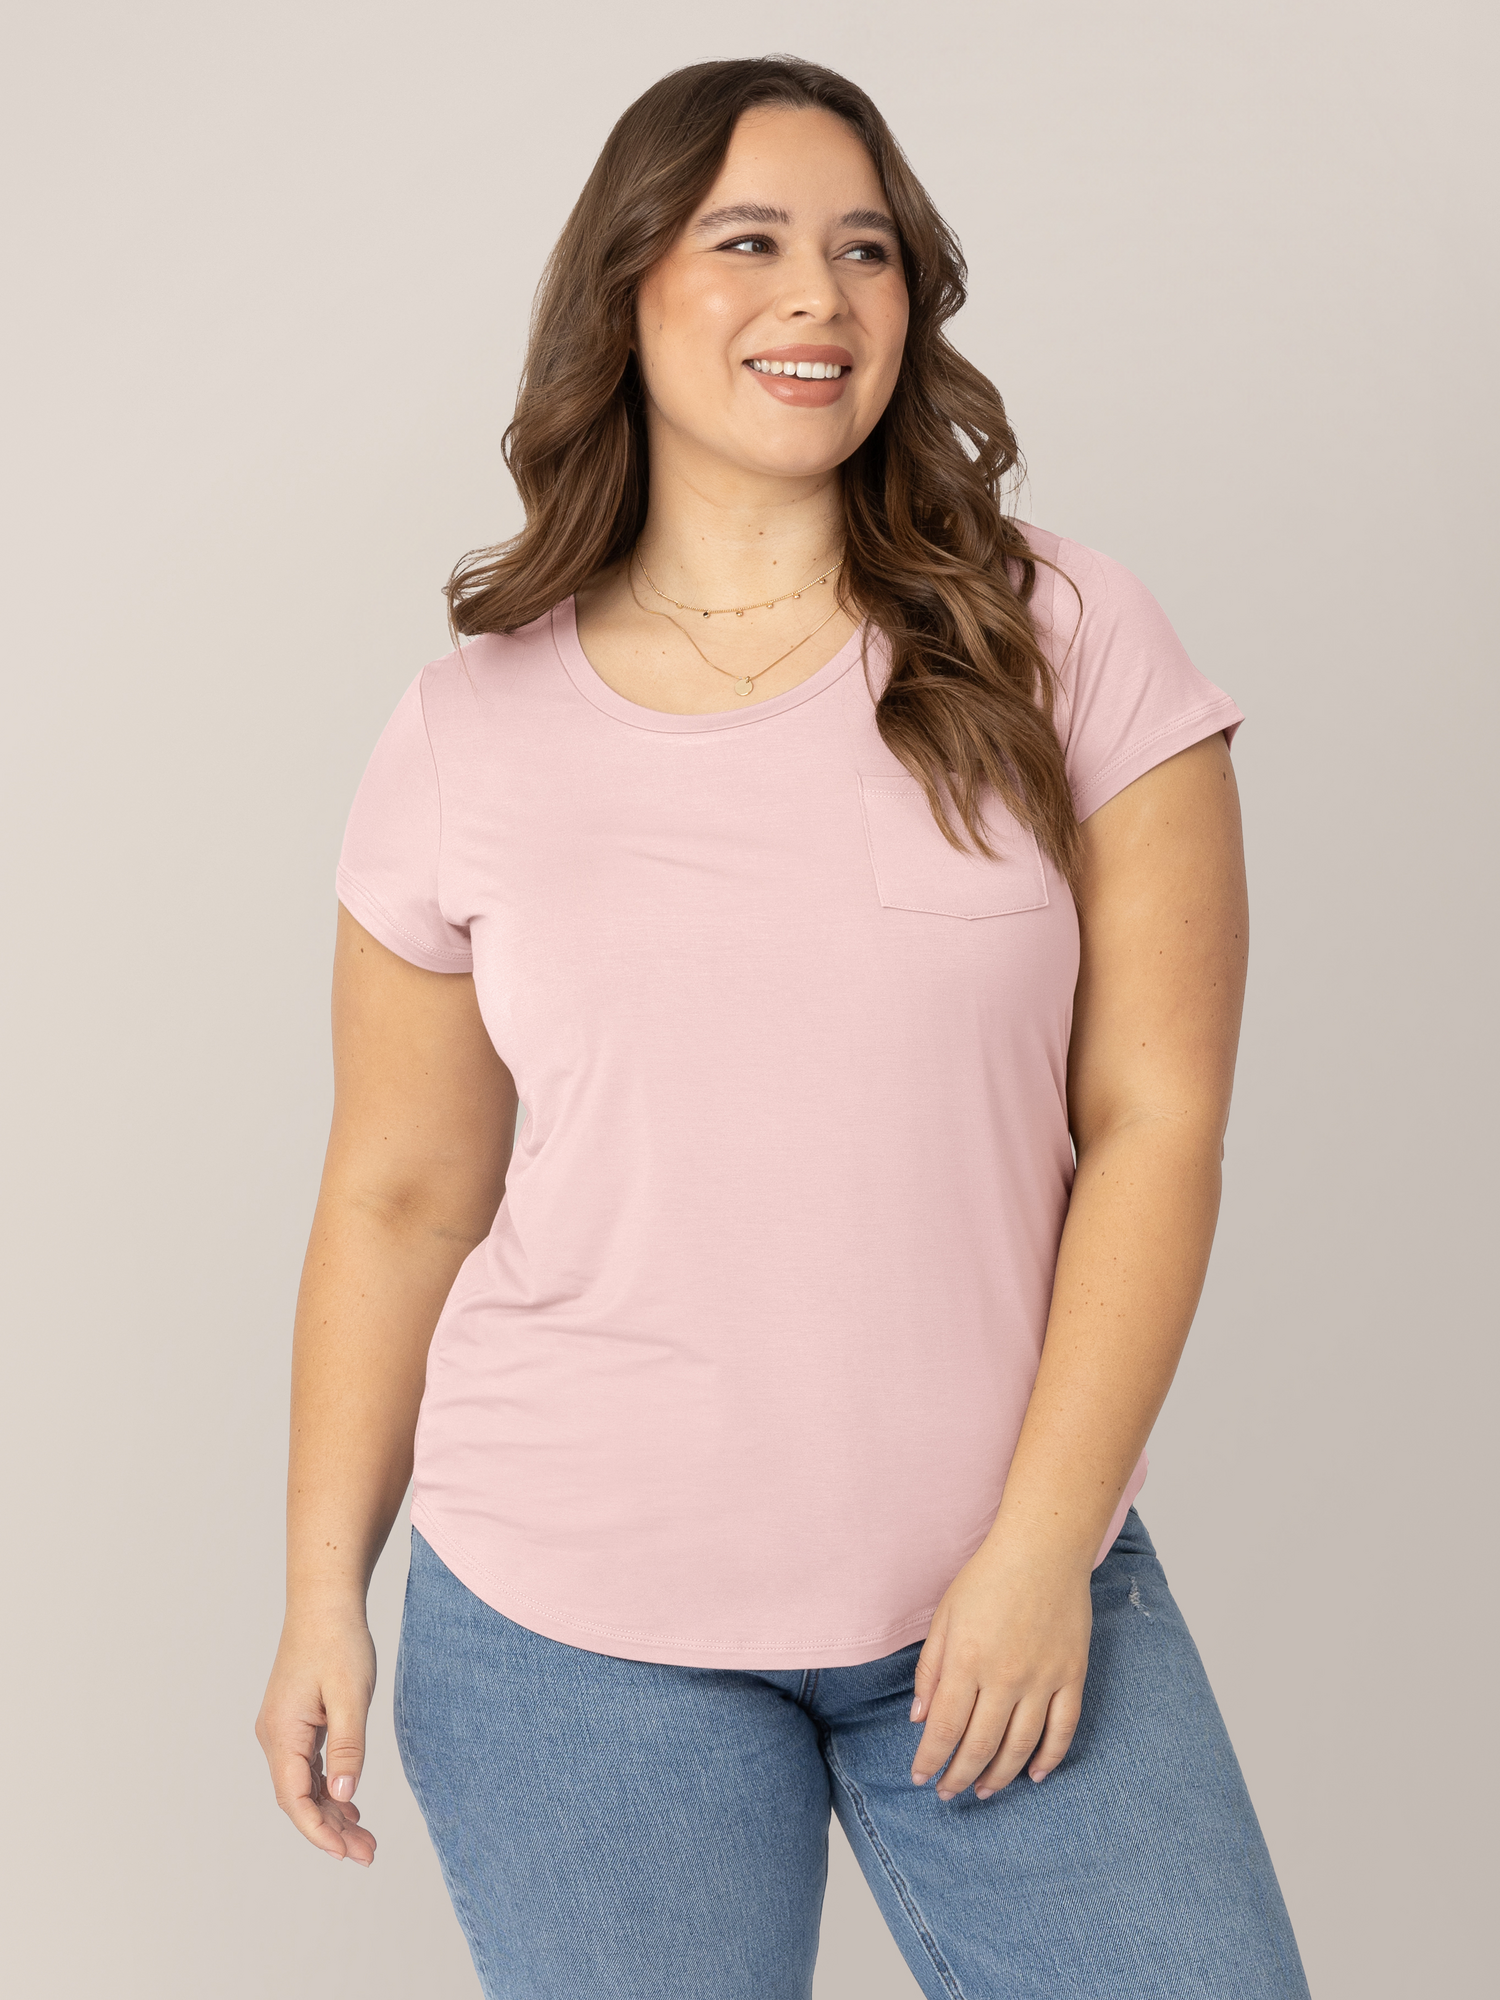 Model wearing the  Everyday Maternity & Nursing T-shirt in Dusty Pink with a pocket.